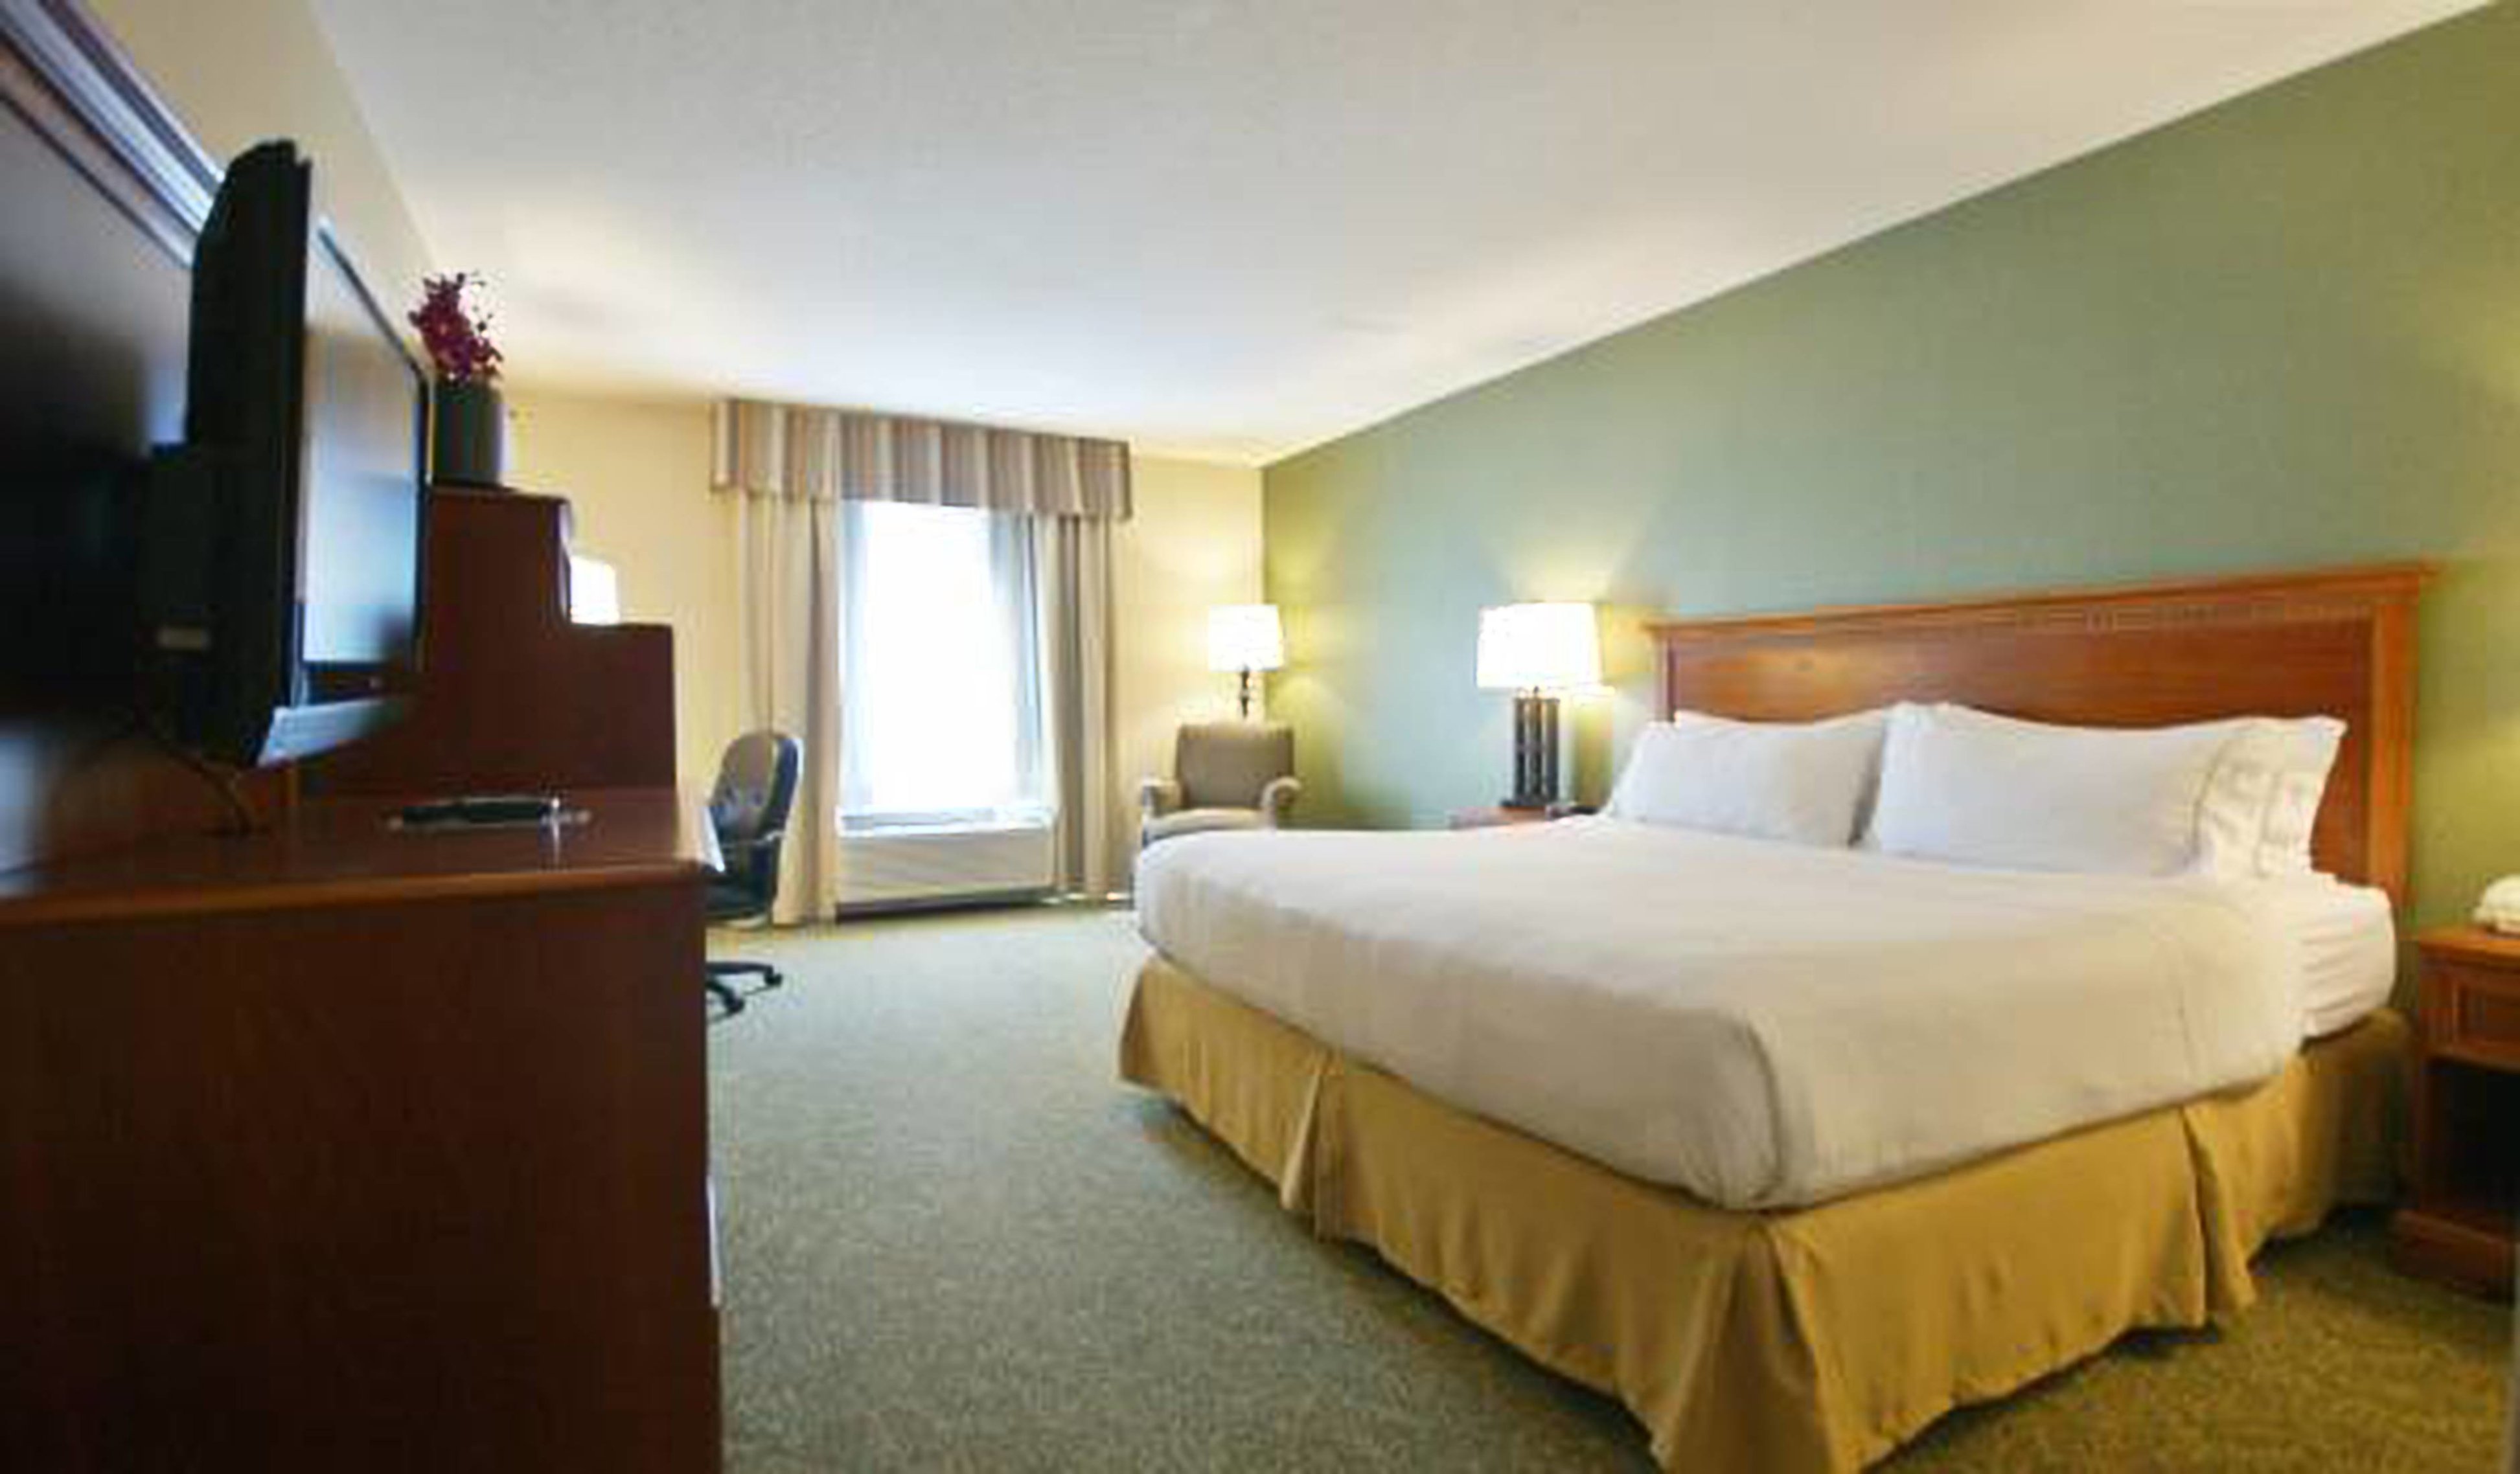 King Standard Guest Room in our Hagerstown hotel